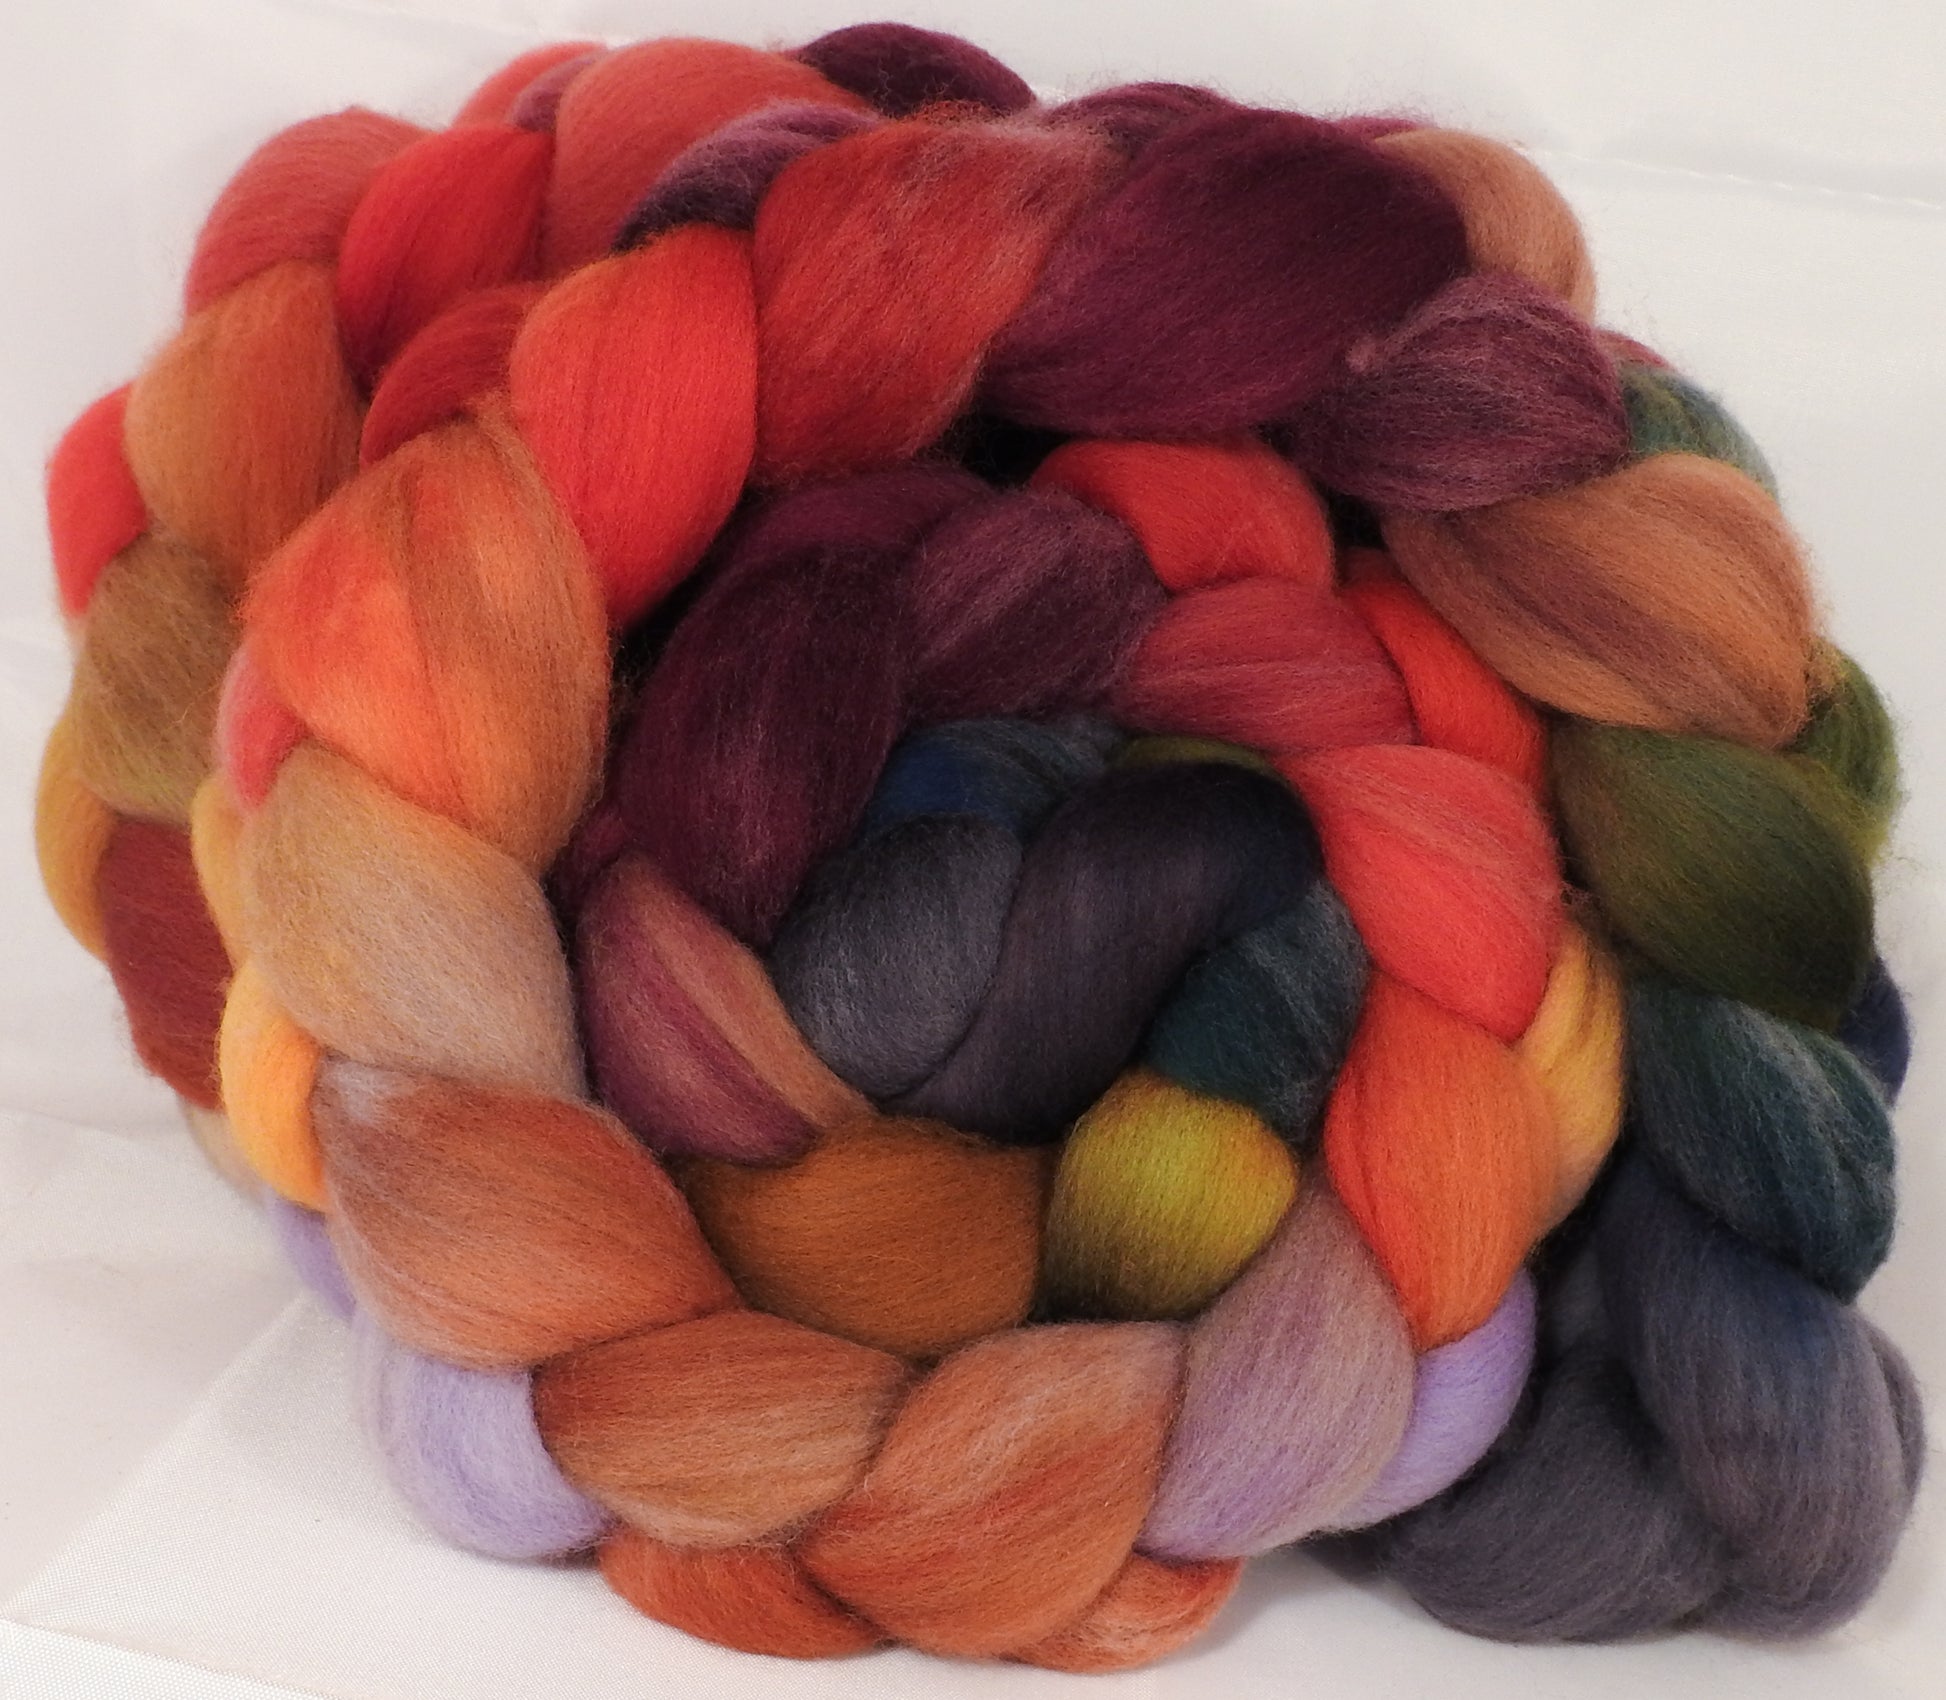 Hand dyed top for spinning -Poinsettia-Organic Polwarth - Inglenook Fibers